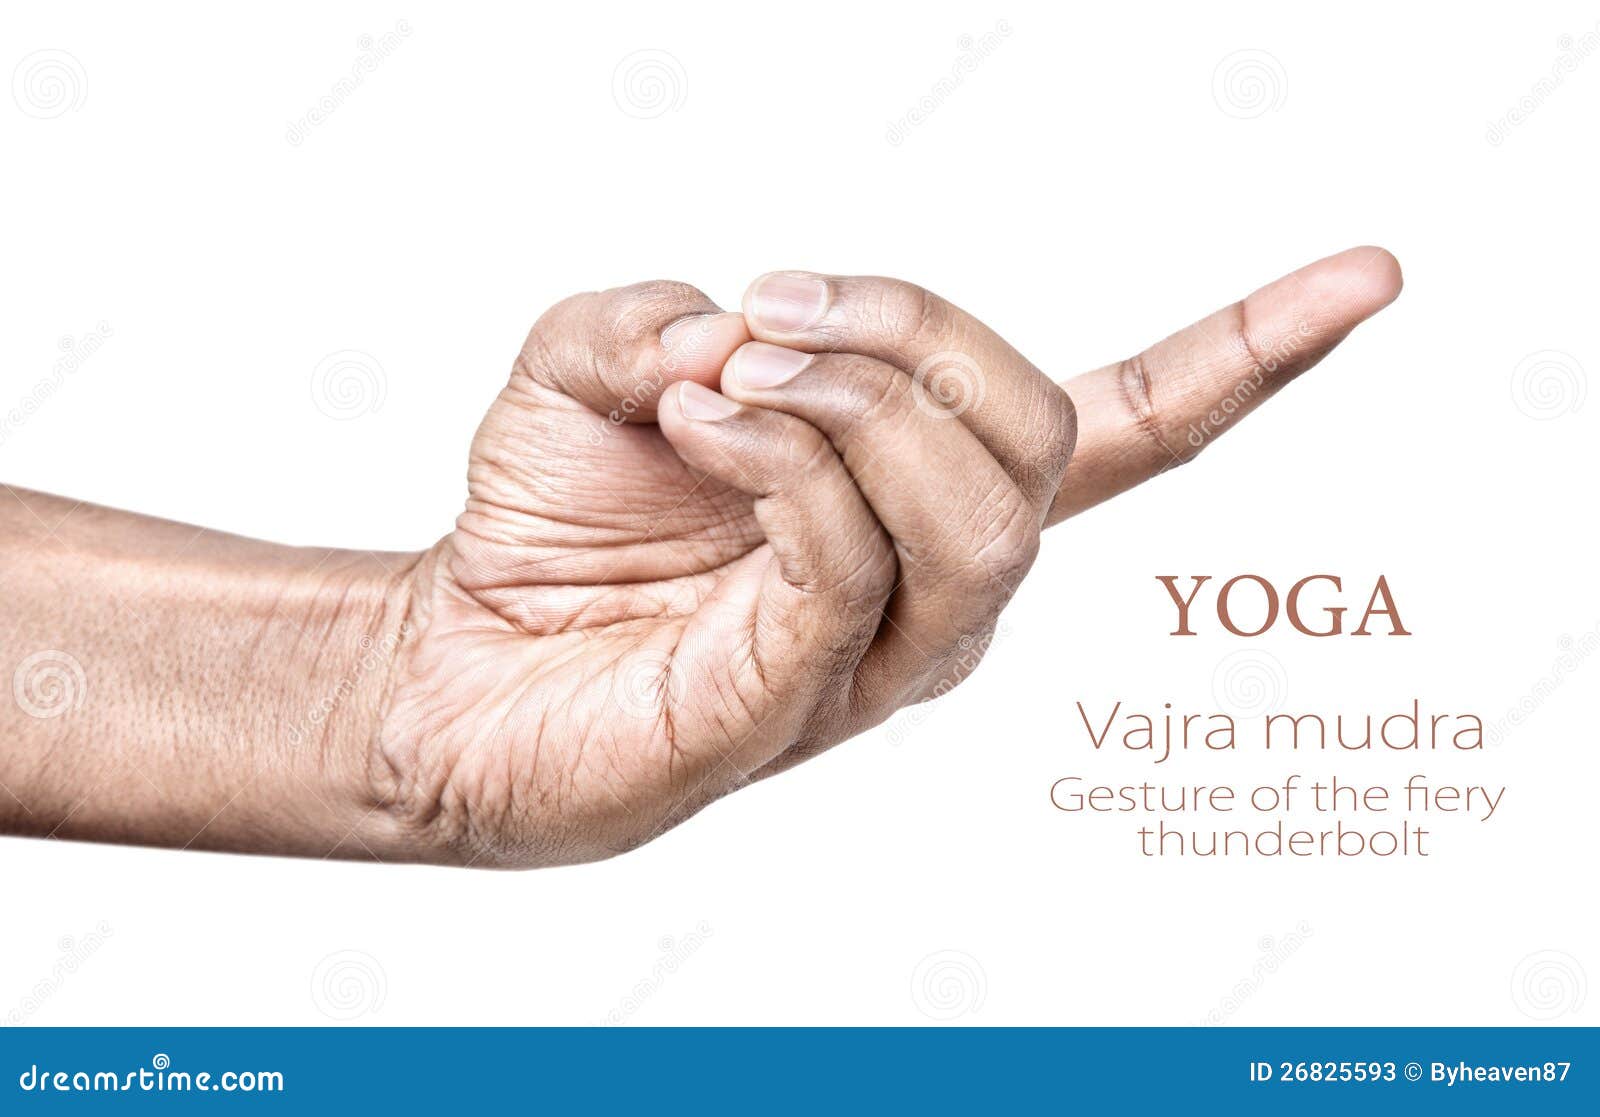 Yoga Mudras For Beginners: Best Mudras, How to Practice - L'Aquila Active